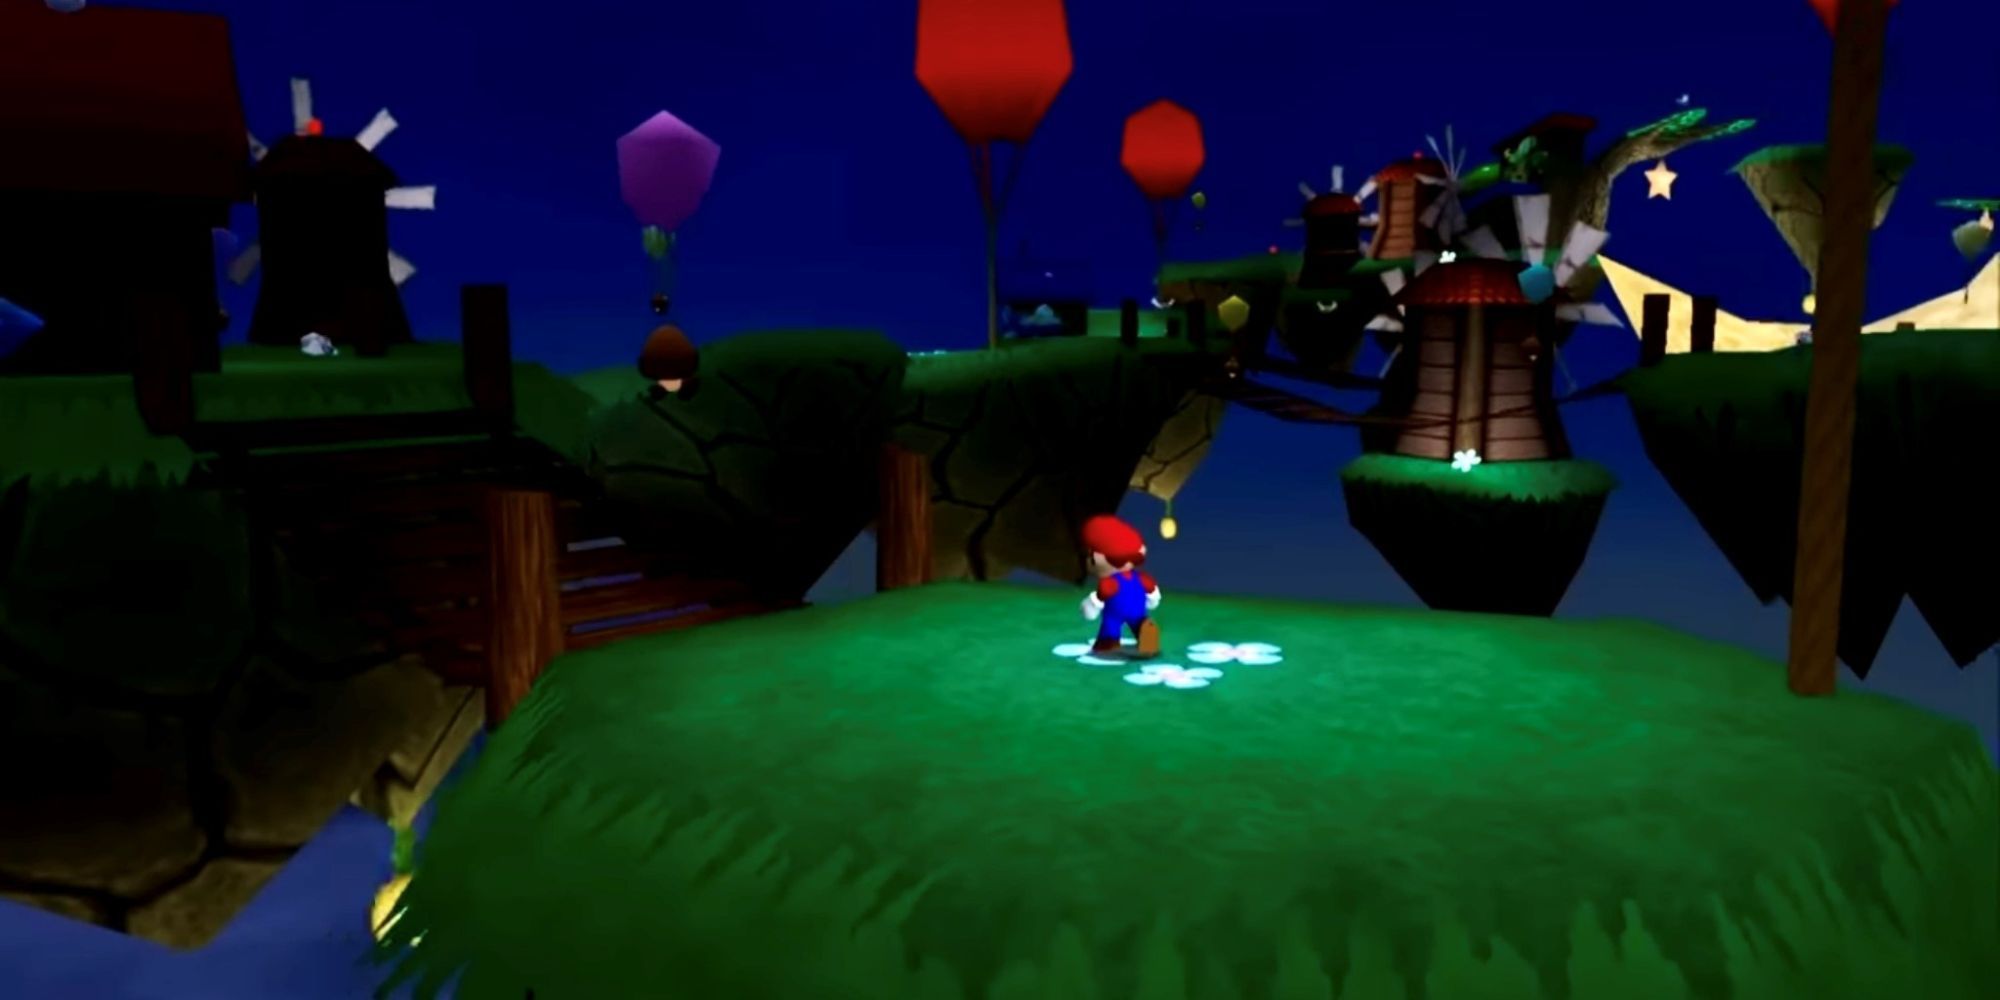 A brand new level of Mario 64 showing Mario on a grassy floating island